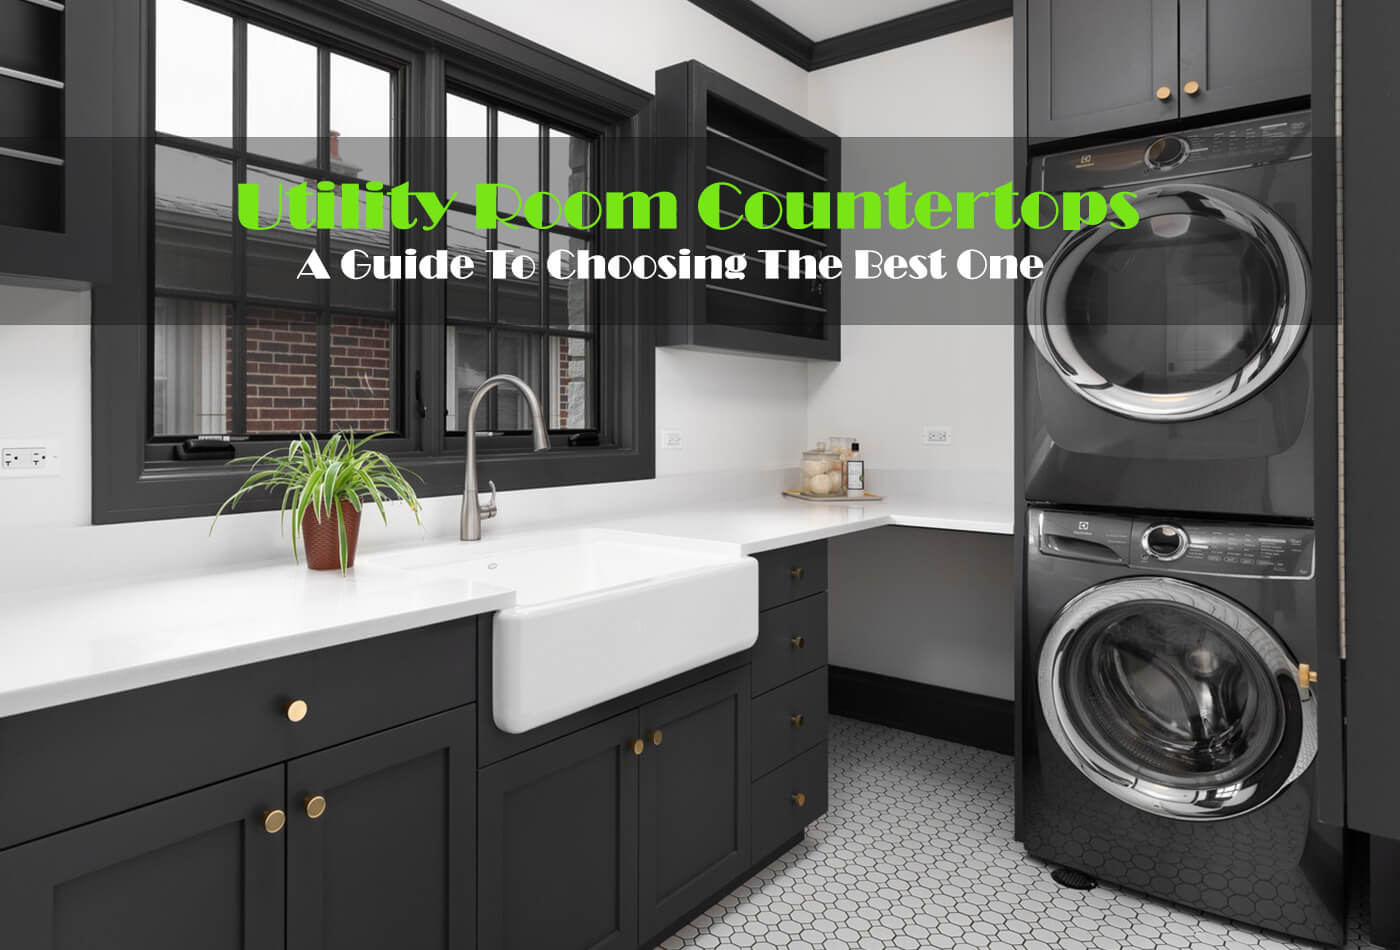 Utility Room Countertops - A Guide To Choosing The Best One